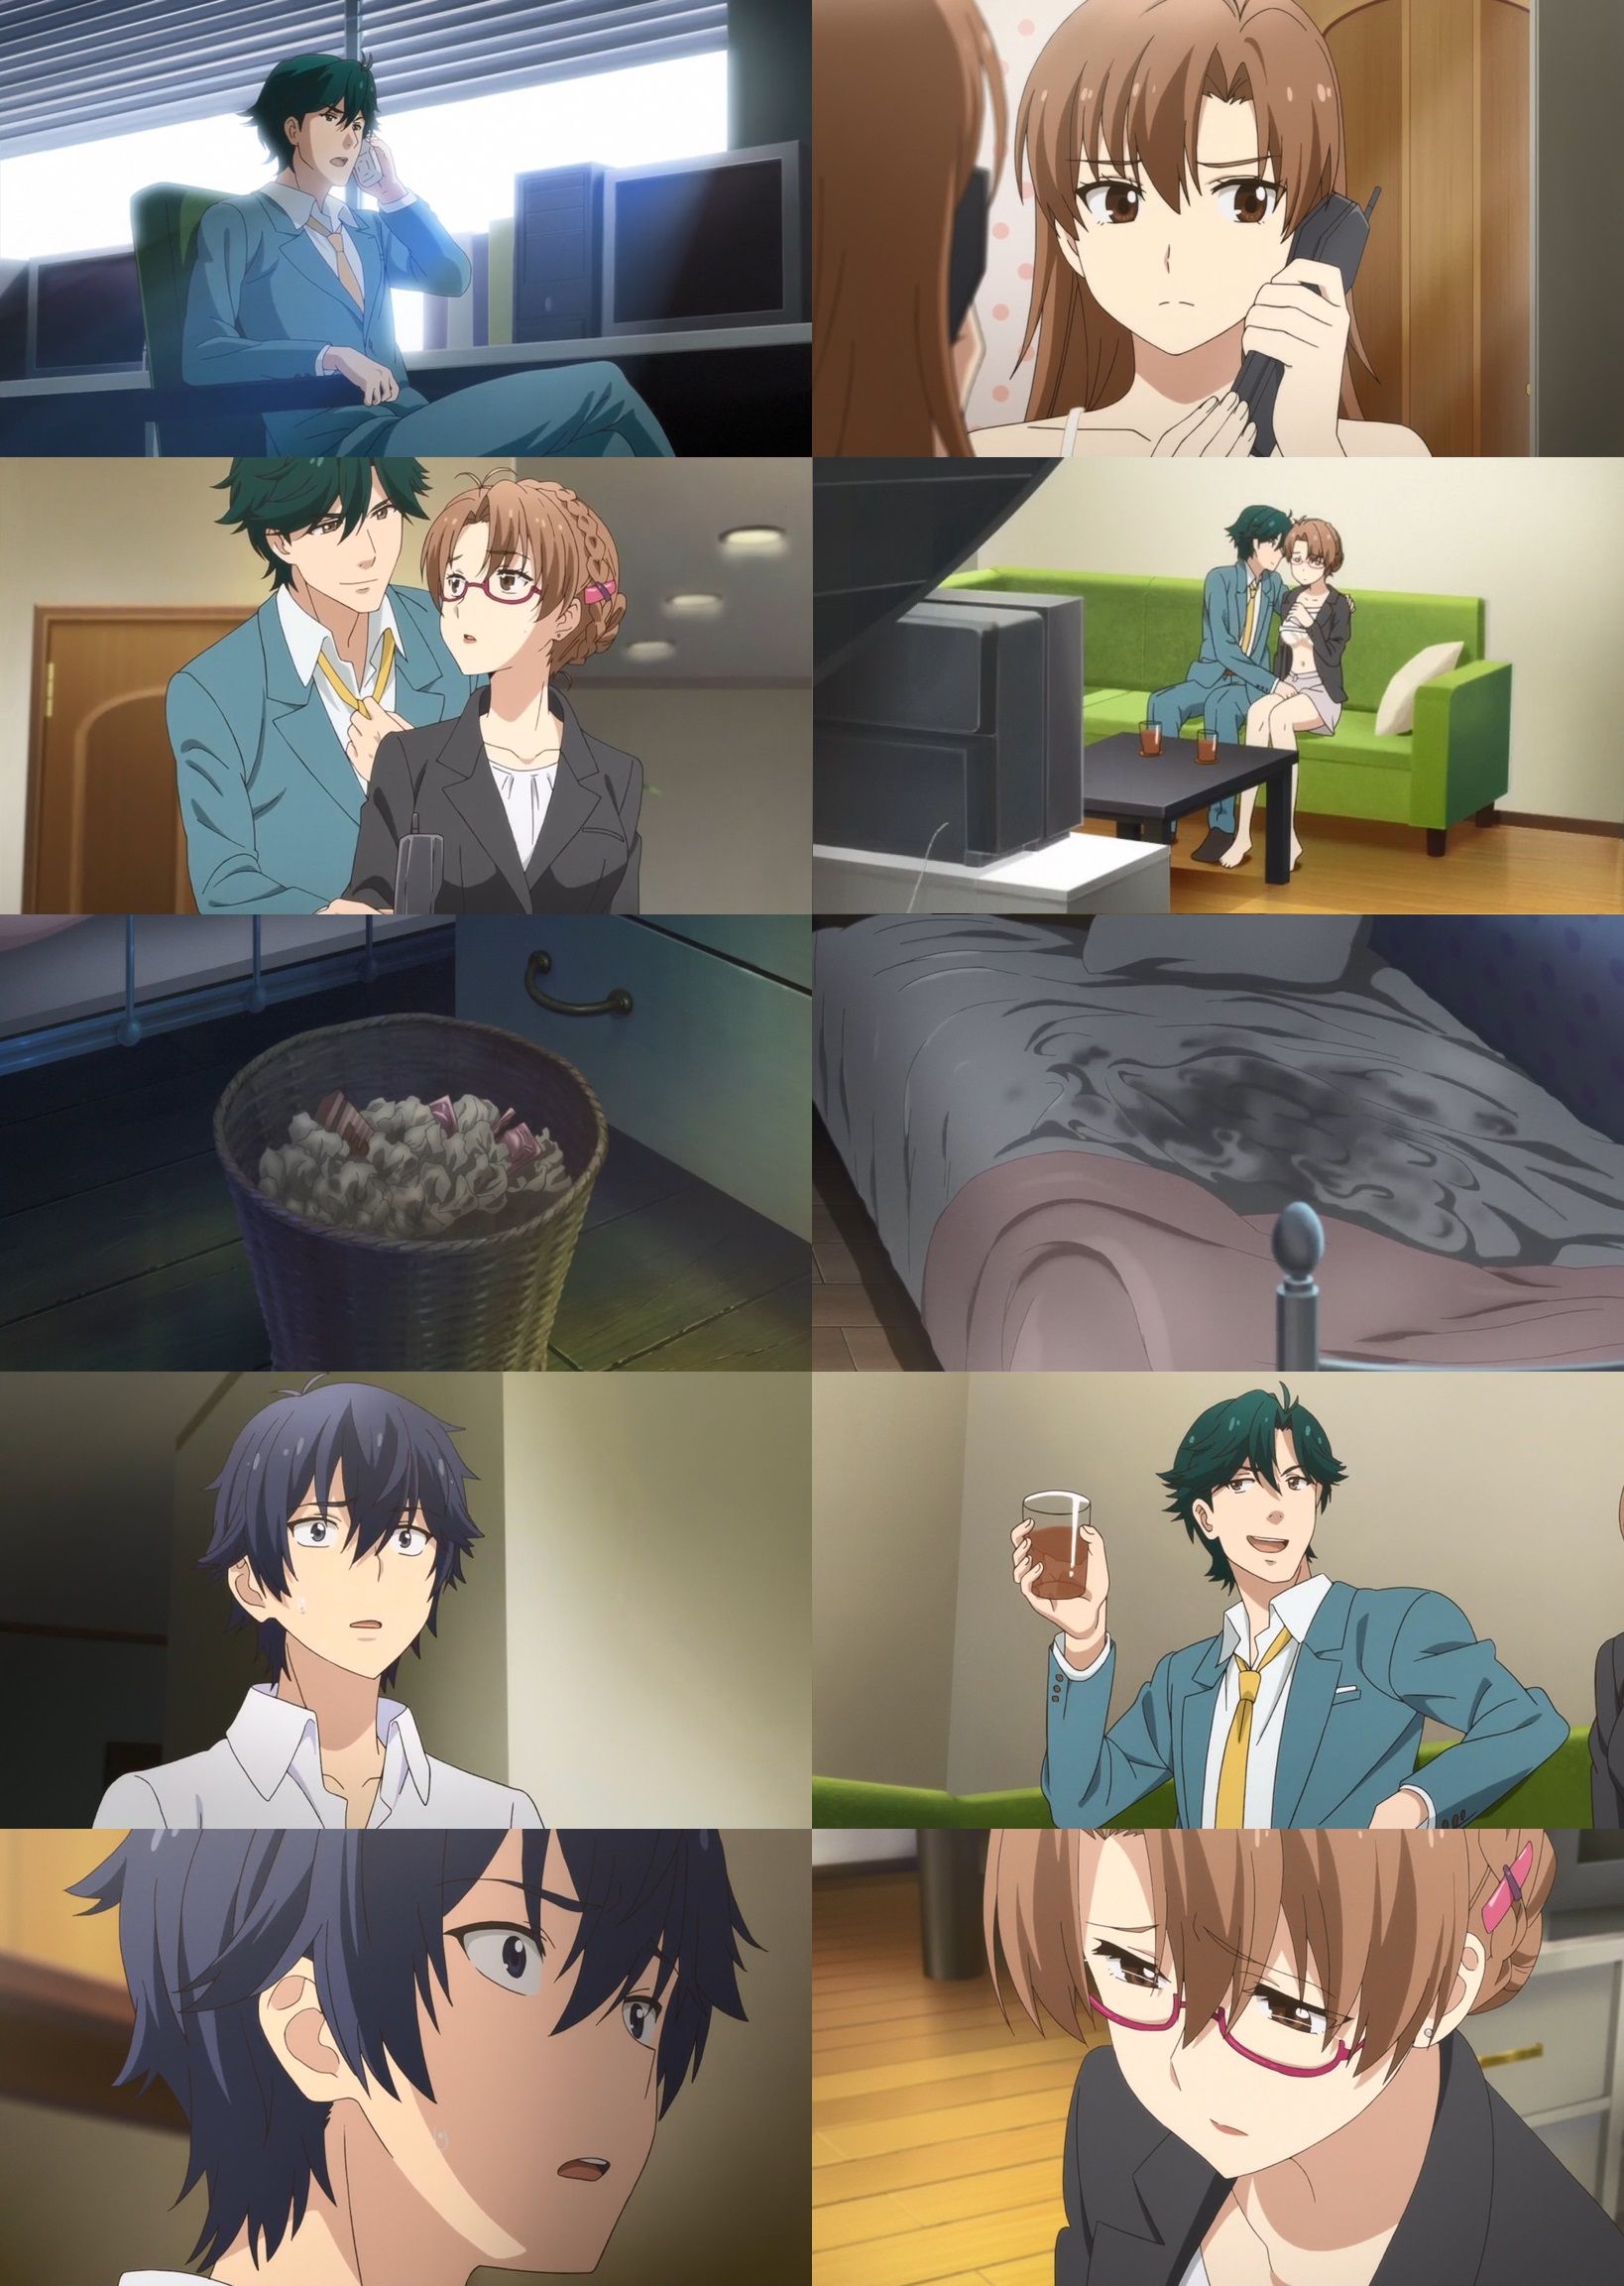 Anime [YU-NO], the scene of the sheet is Betchobecho wwwwww with condom use rolled in the sex scene 1